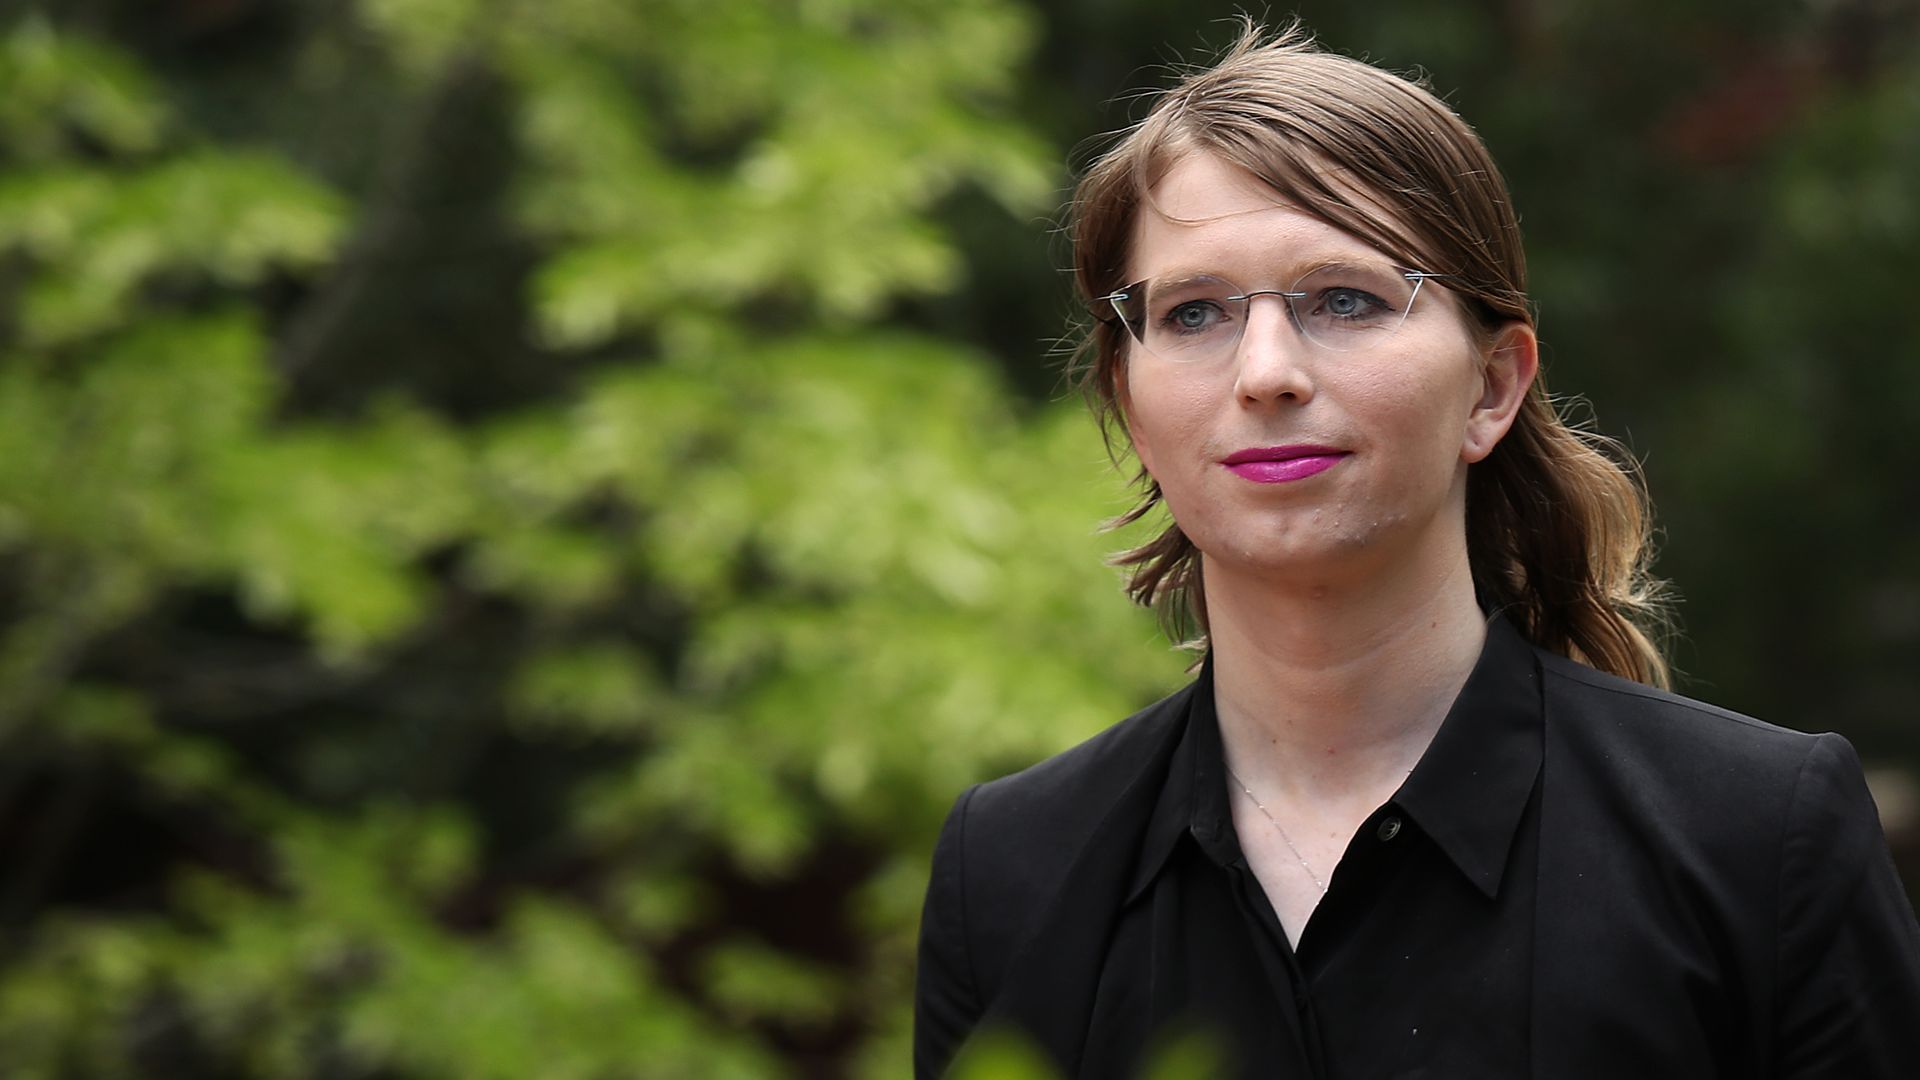 Army intelligence analyst Chelsea Manning arrives at the Albert Bryan U.S federal courthouse May 16